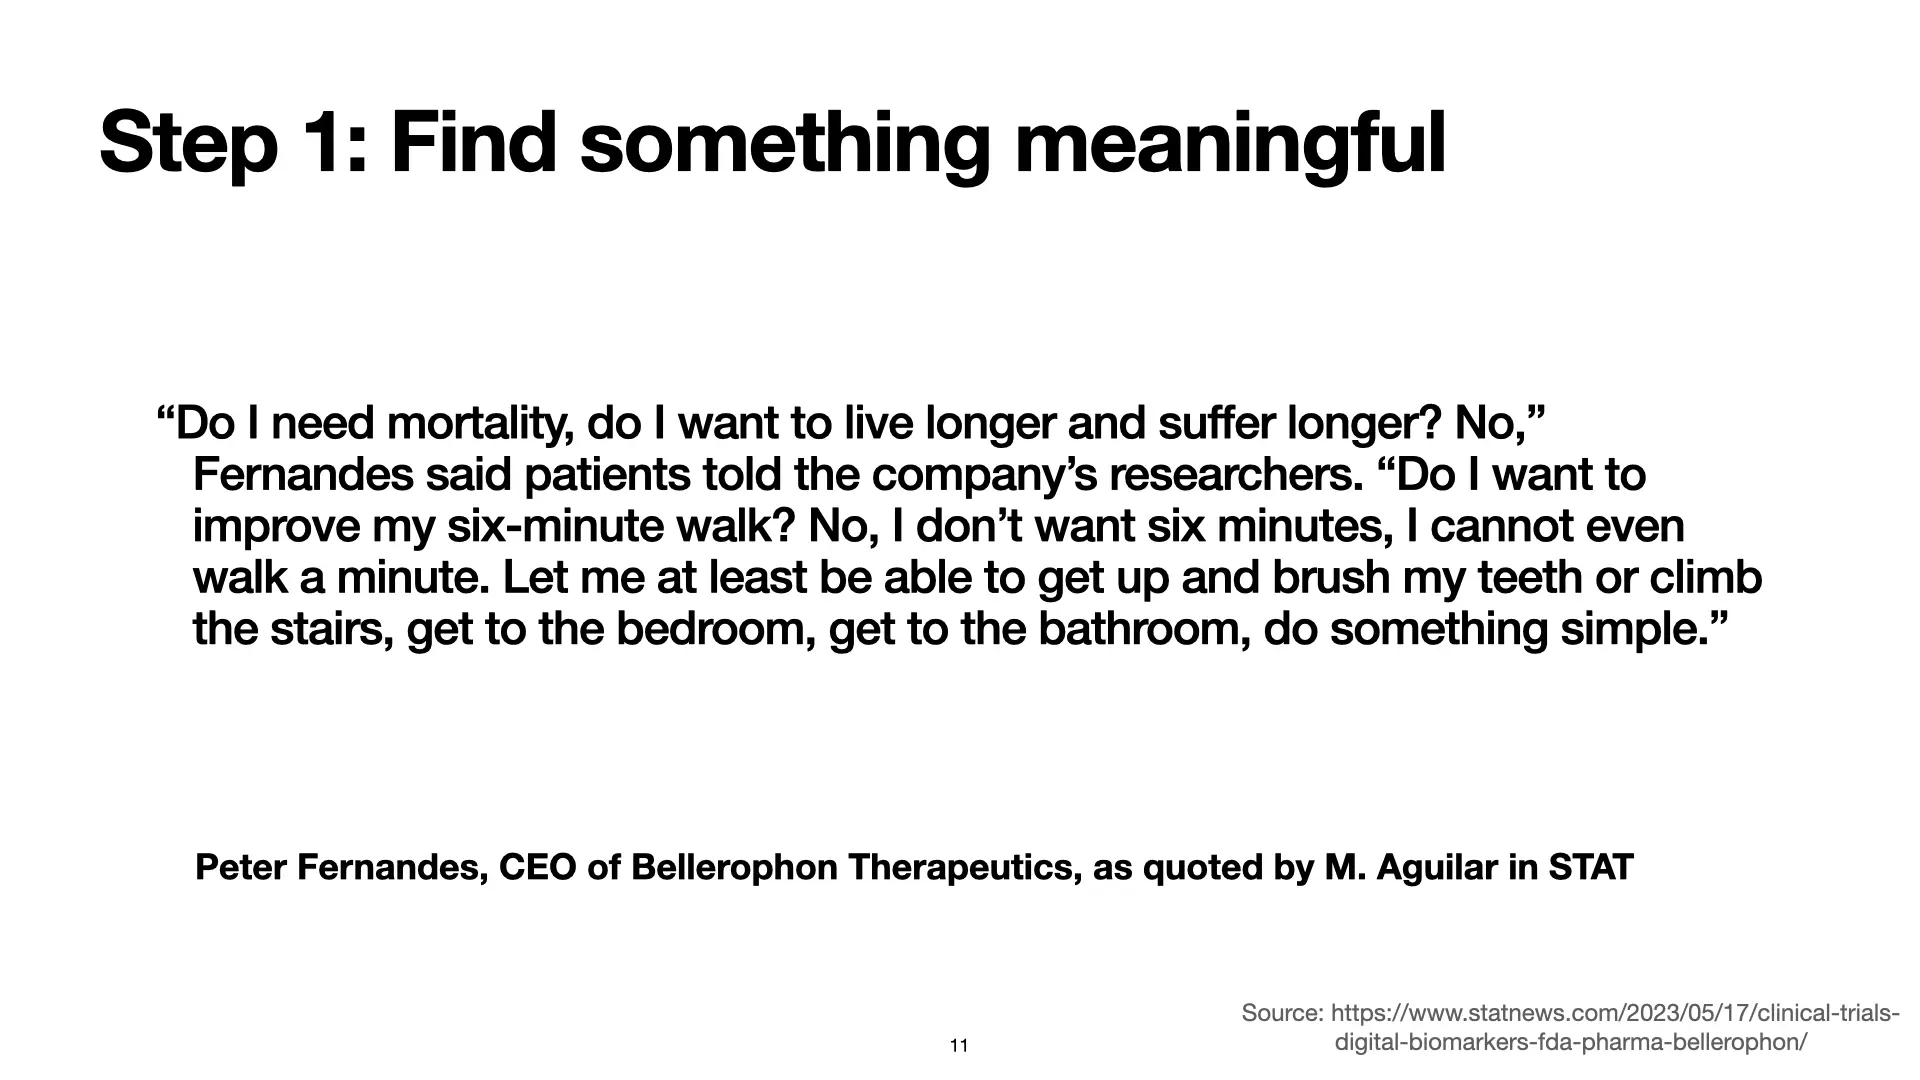 Slide 11: Step 1: Find something meaningful: 'Do I need mortality, do I want to live longer and suffer longer? No,' Fernandes said patients told the company’s researchers. 'Do I want to improve my six-minute walk? No, I don’t want six minutes, I cannot even walk a minute. Let me at least be able to get up and brush my teeth or climb the stairs, get to the bedroom, get to the bathroom, do something simple.' -Peter Fernandes, CEO of Bellerophon Therapeutics, as quoted by M. Aguilar in STAT. Source: https://www.statnews.com/2023/05/17/clinical-trials-digital-biomarkers-fda-pharma-bellerophon/.